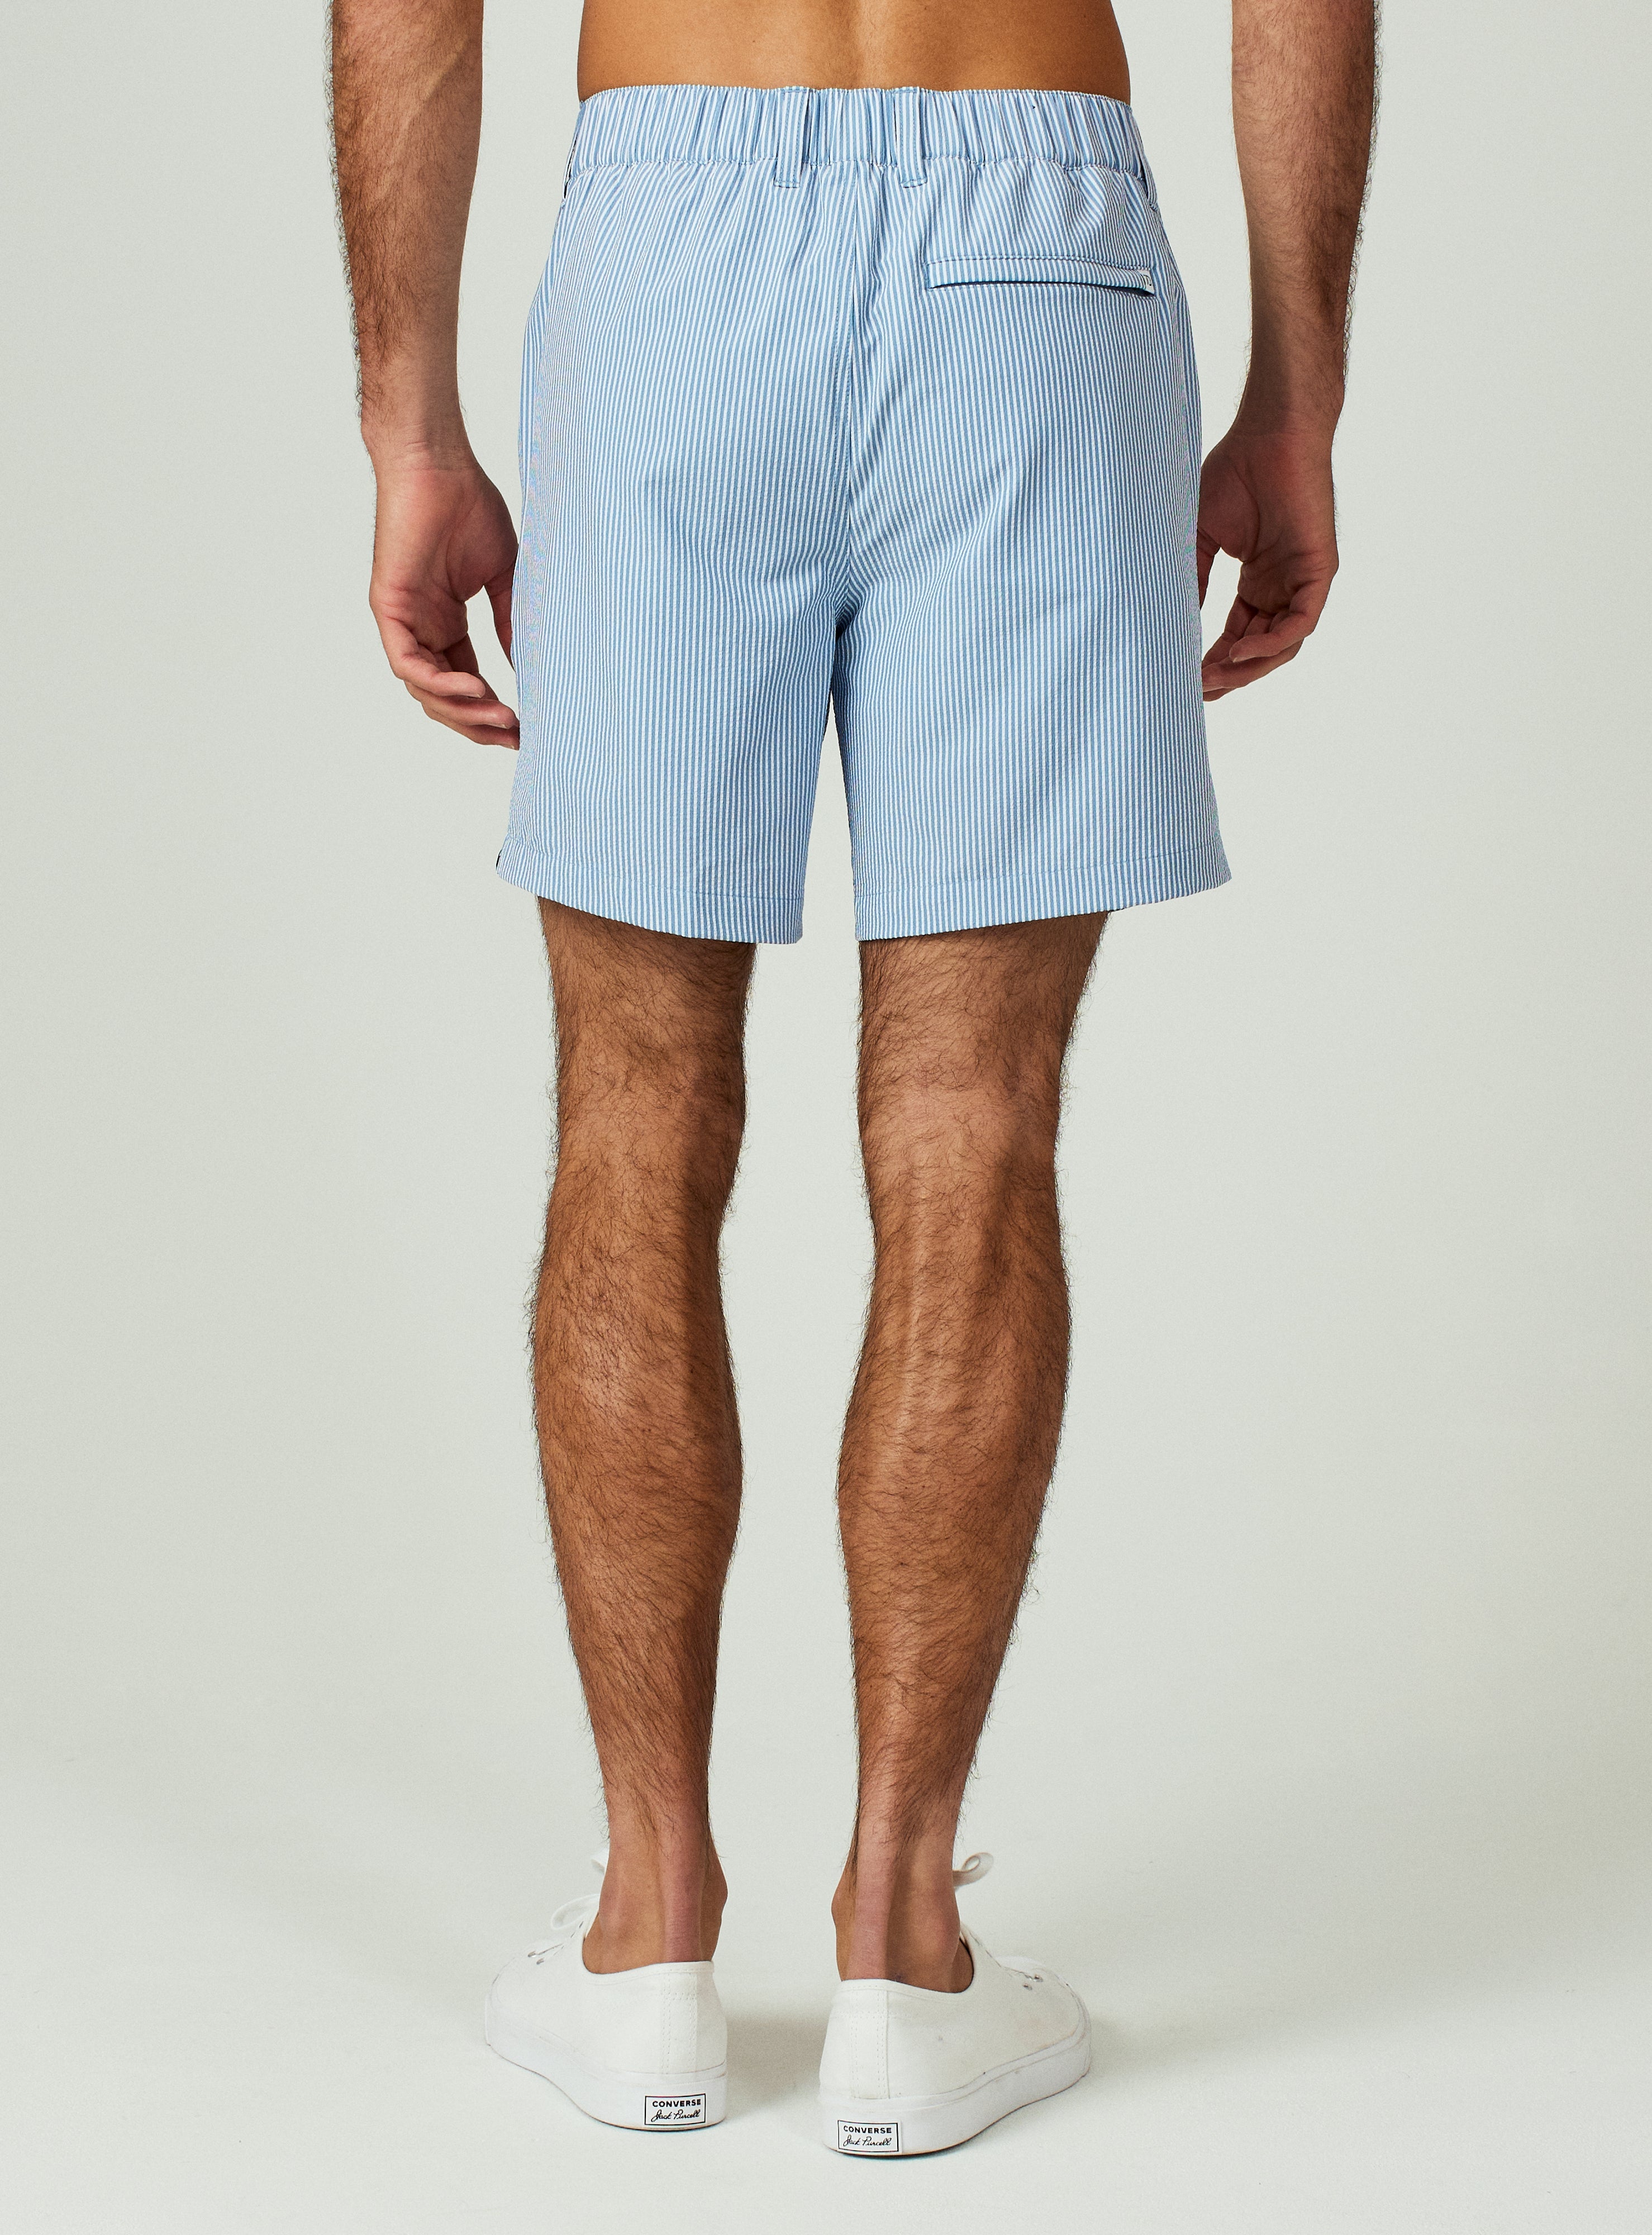 Five-O Knit Performance Short 8 Cloudy Blue